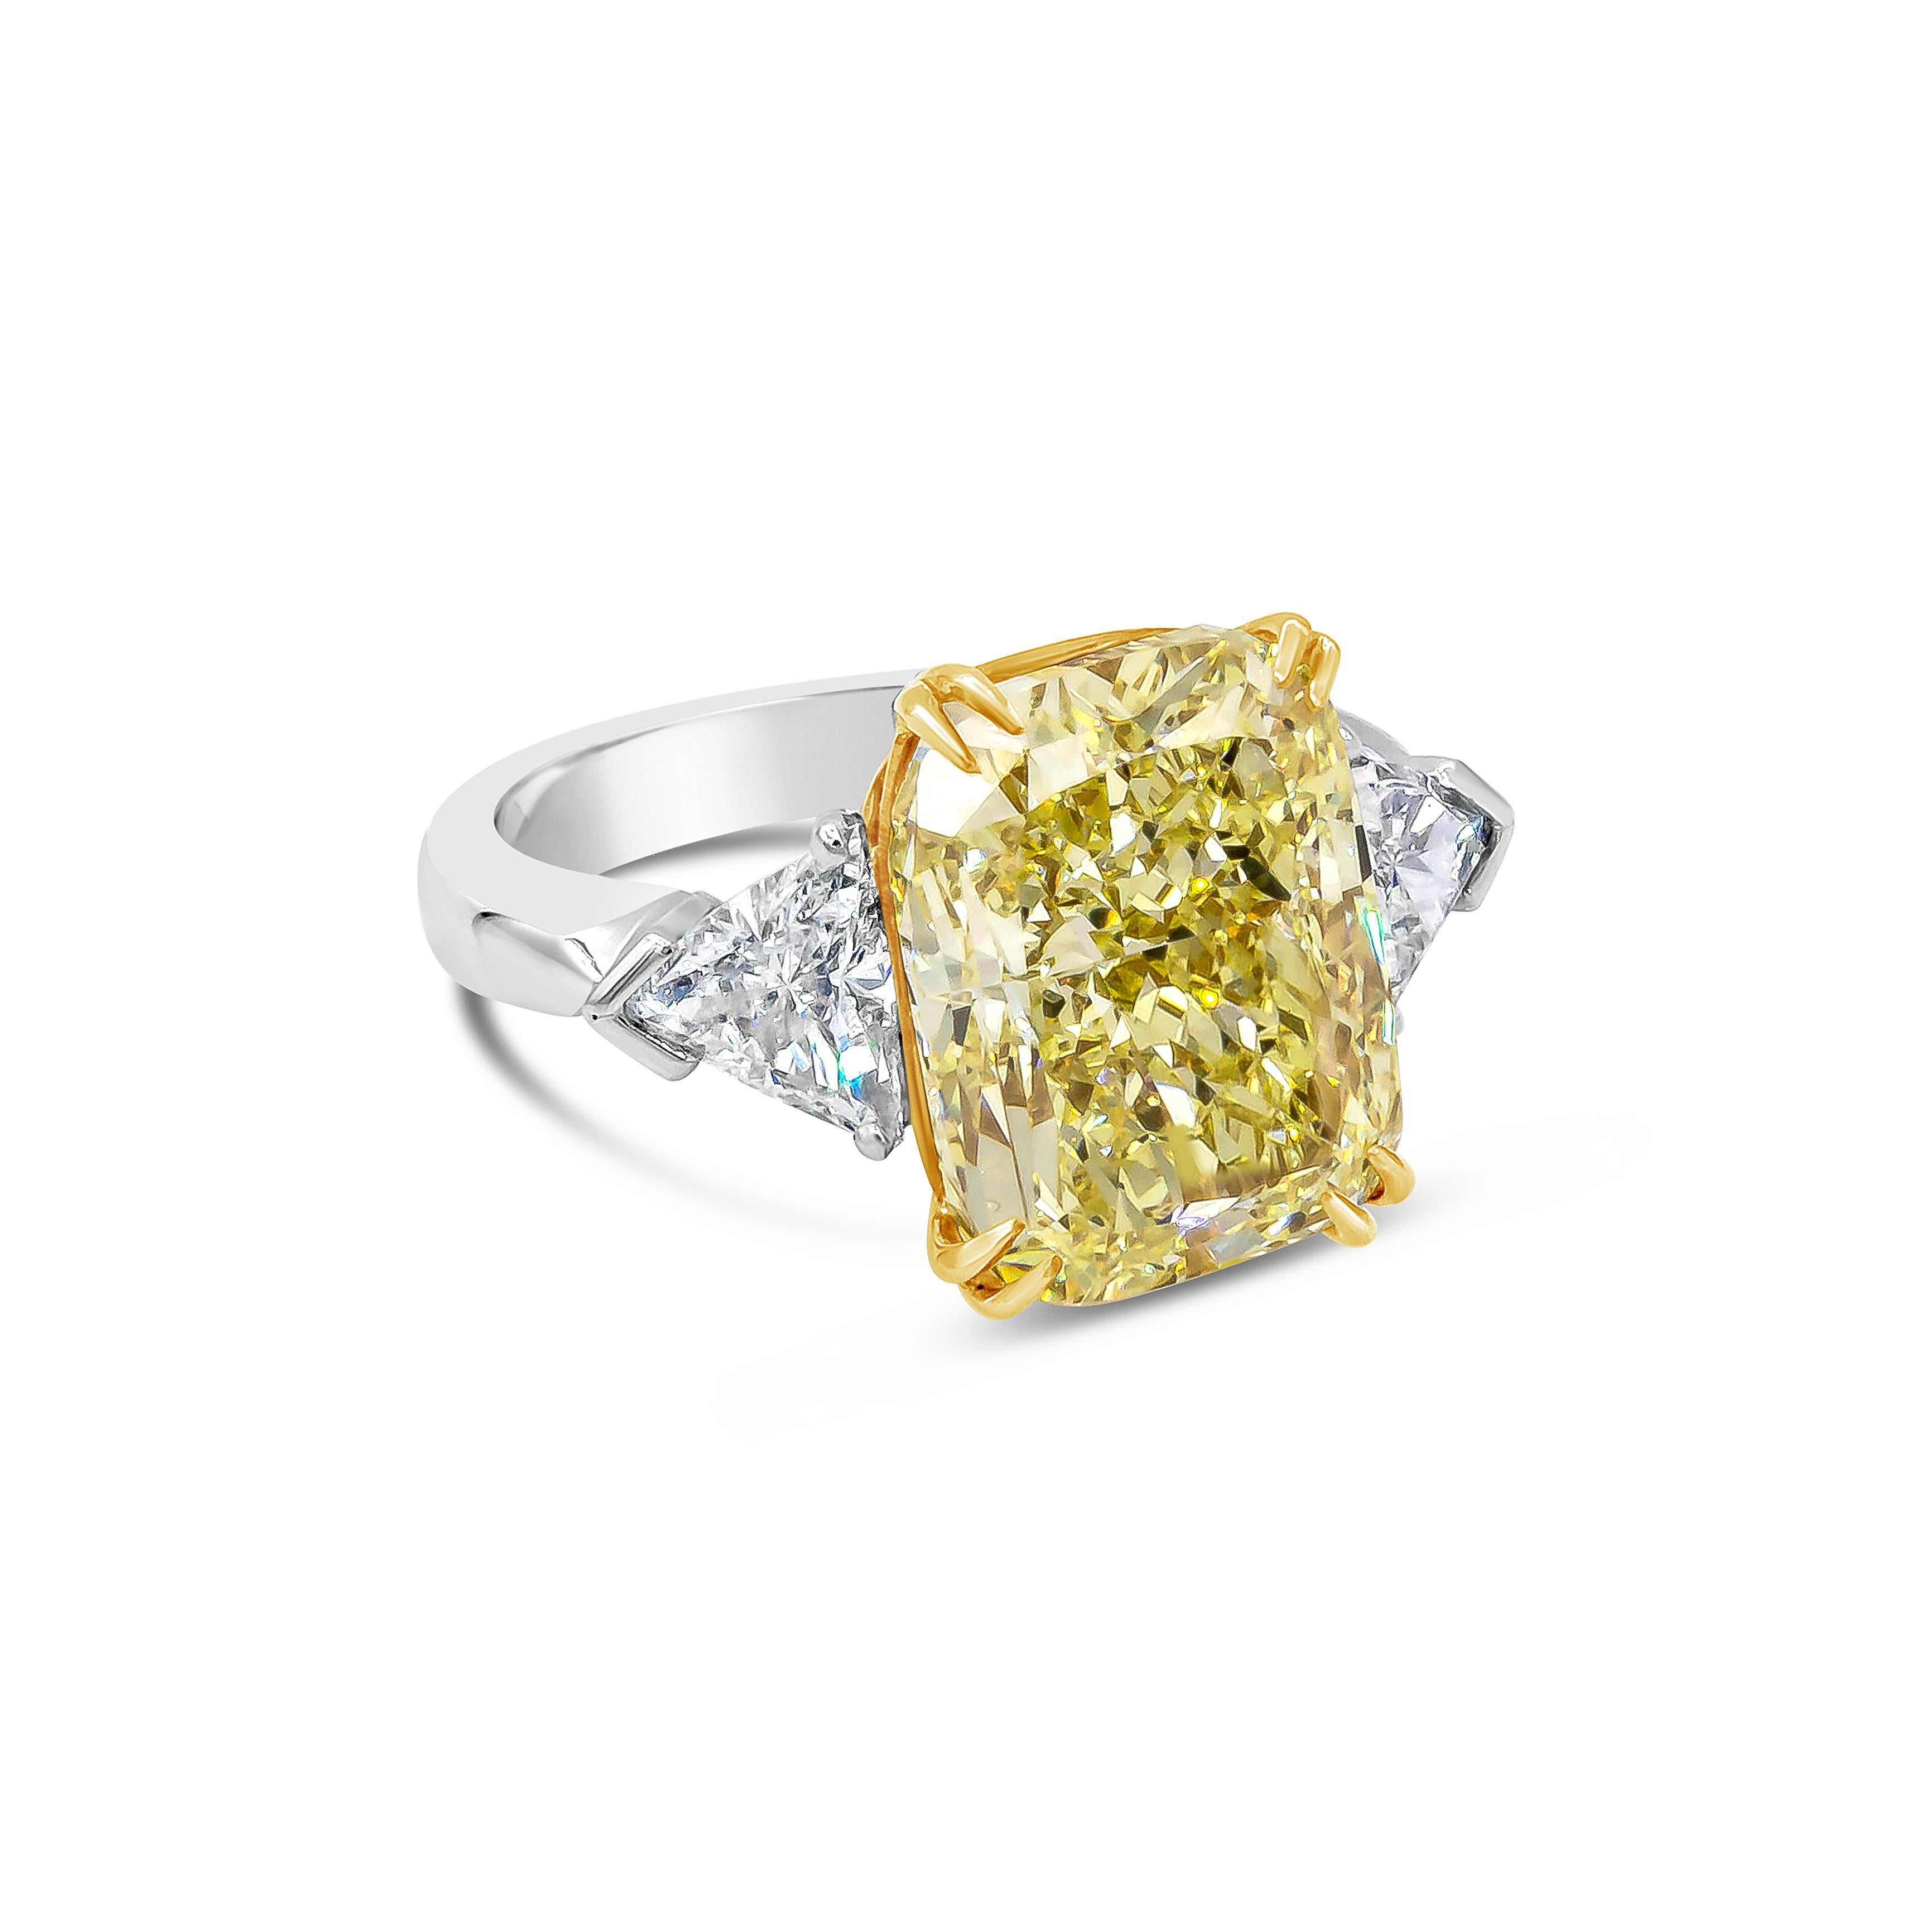 Showcases a color-rich 10.11 carats cushion cut diamond that GIA certified as Fancy Yellow color and SI1 in clarity, set in eight prong 18K yellow gold. Accented with trillion cut diamond on each side weighing 1.25 carats total. Finely made with